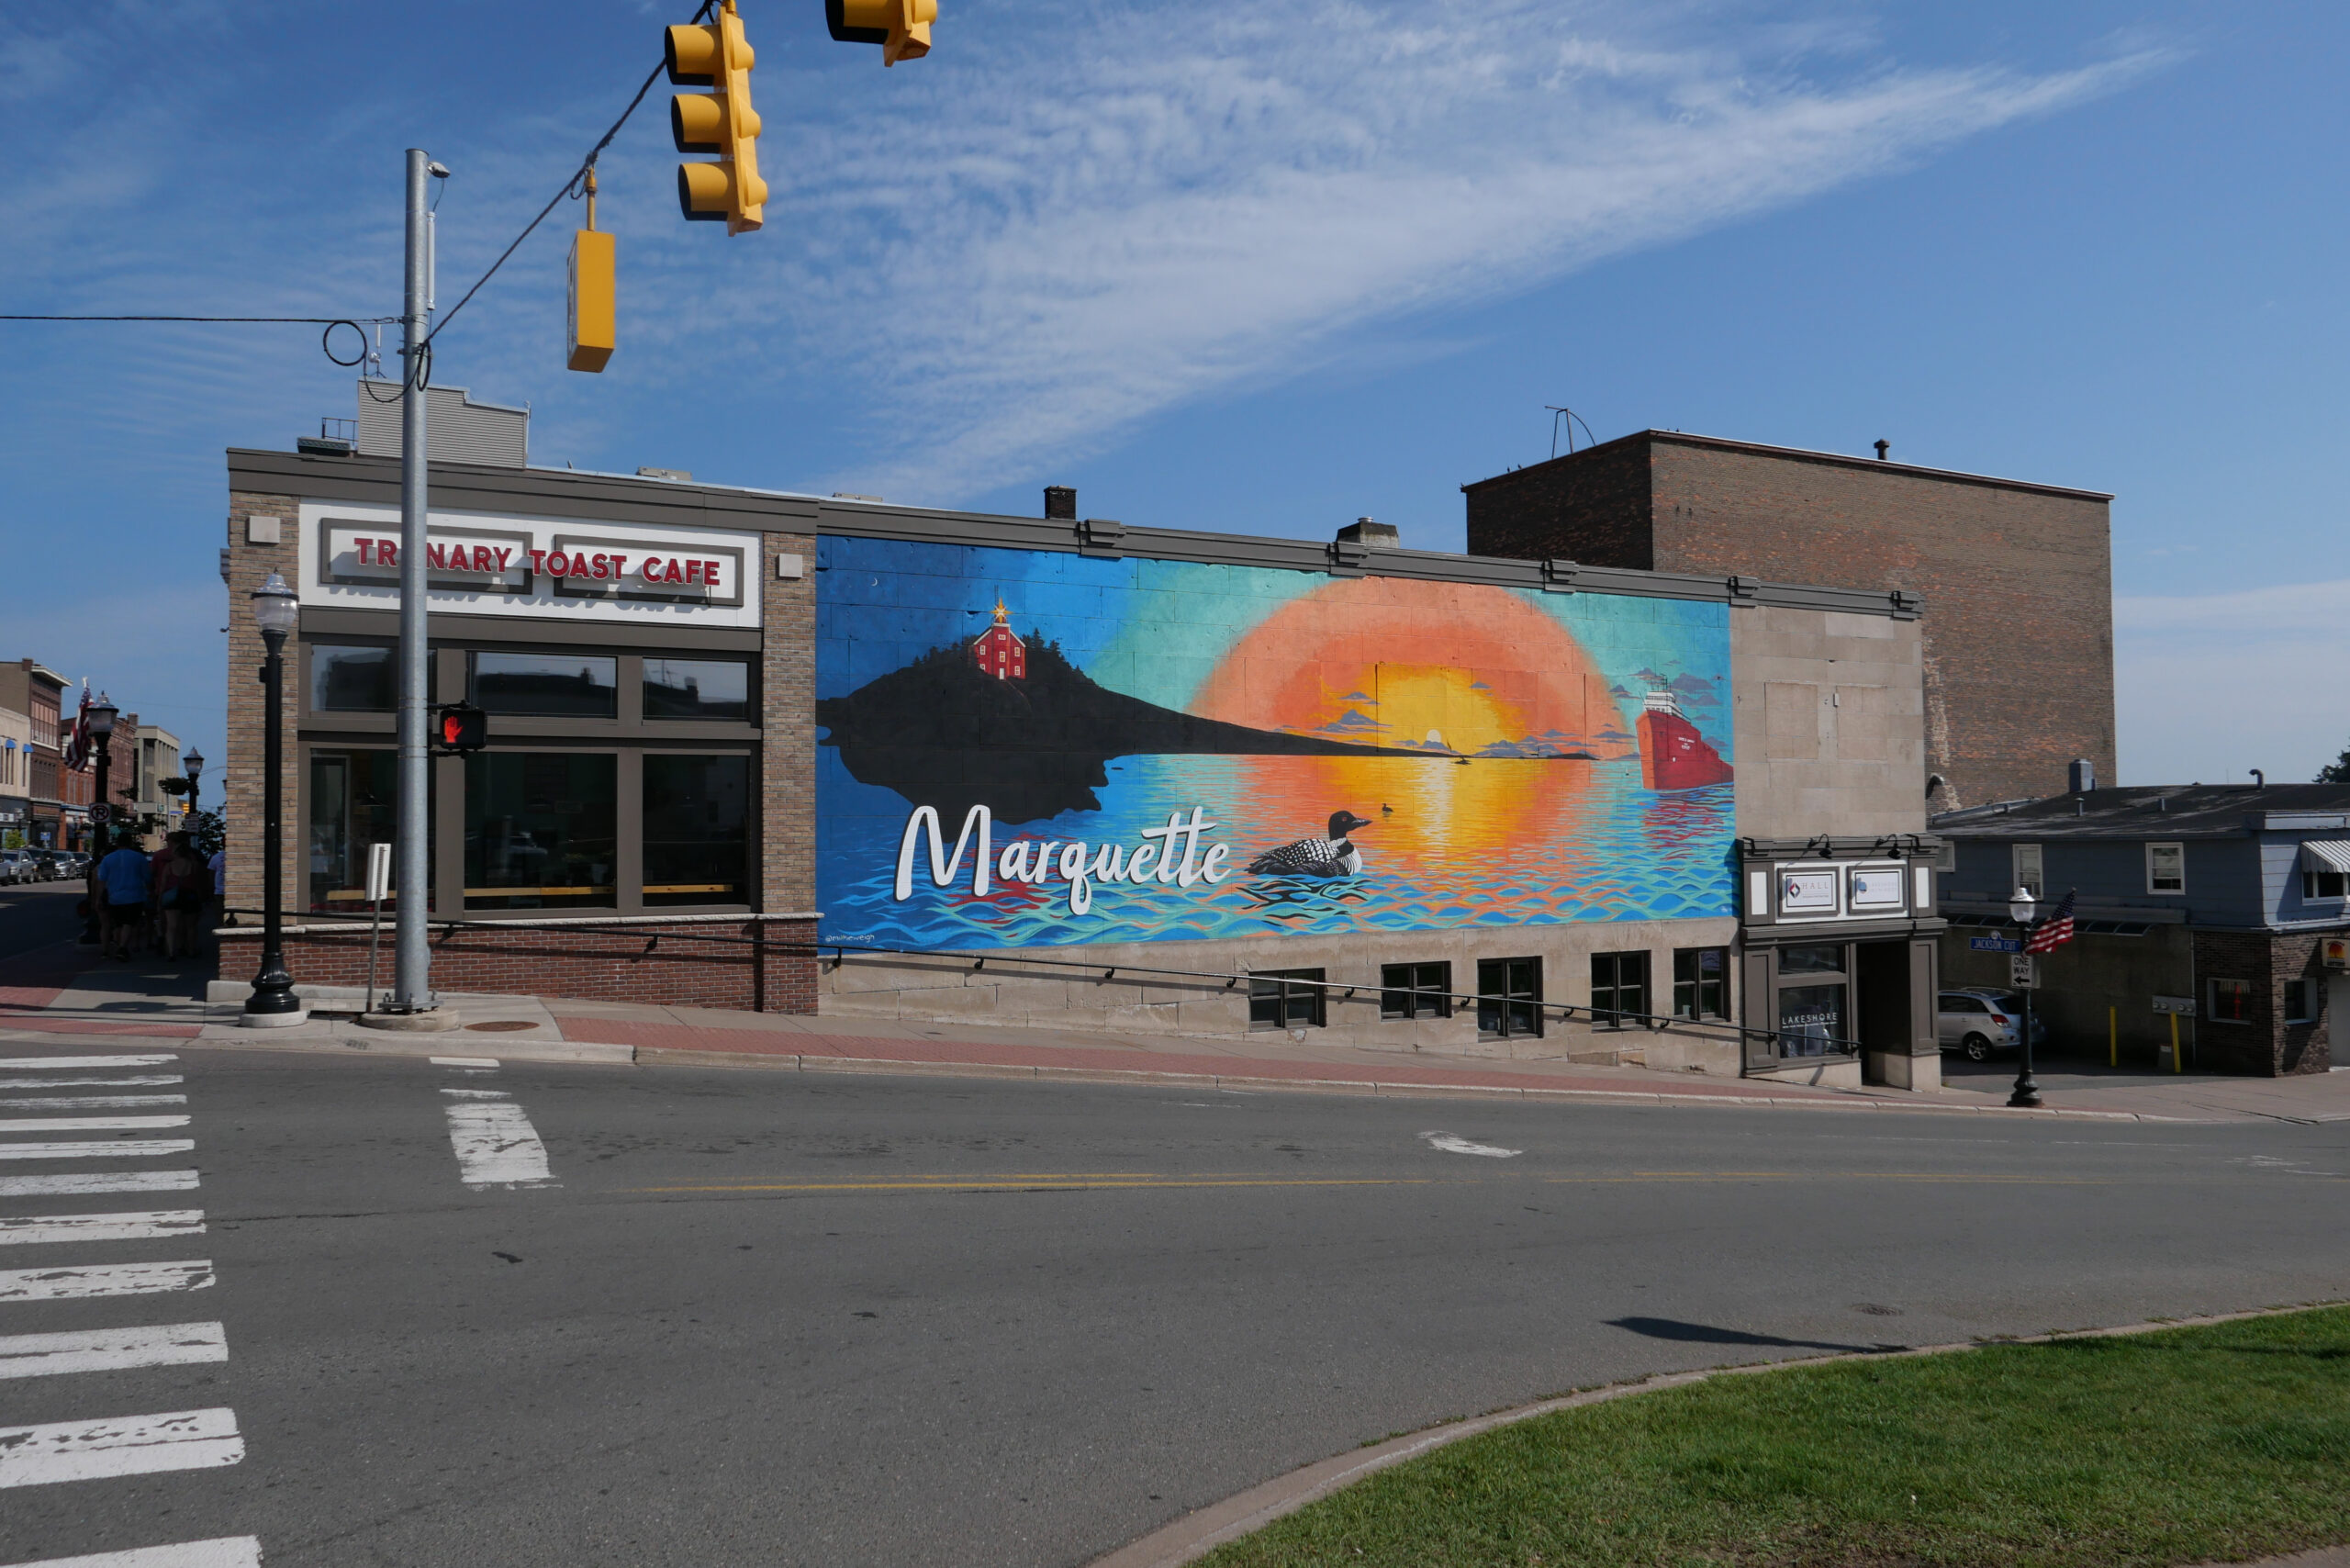 A serene view of a brick building adorned with a vibrant mural on its side wall. The mural features elements like waves, the sun, and the text “Marquette.” The scene is set against a clear blue sky, with a well-marked pedestrian crossing leading towards the cafe. The building houses the “TRENARY TOAST CAFE”